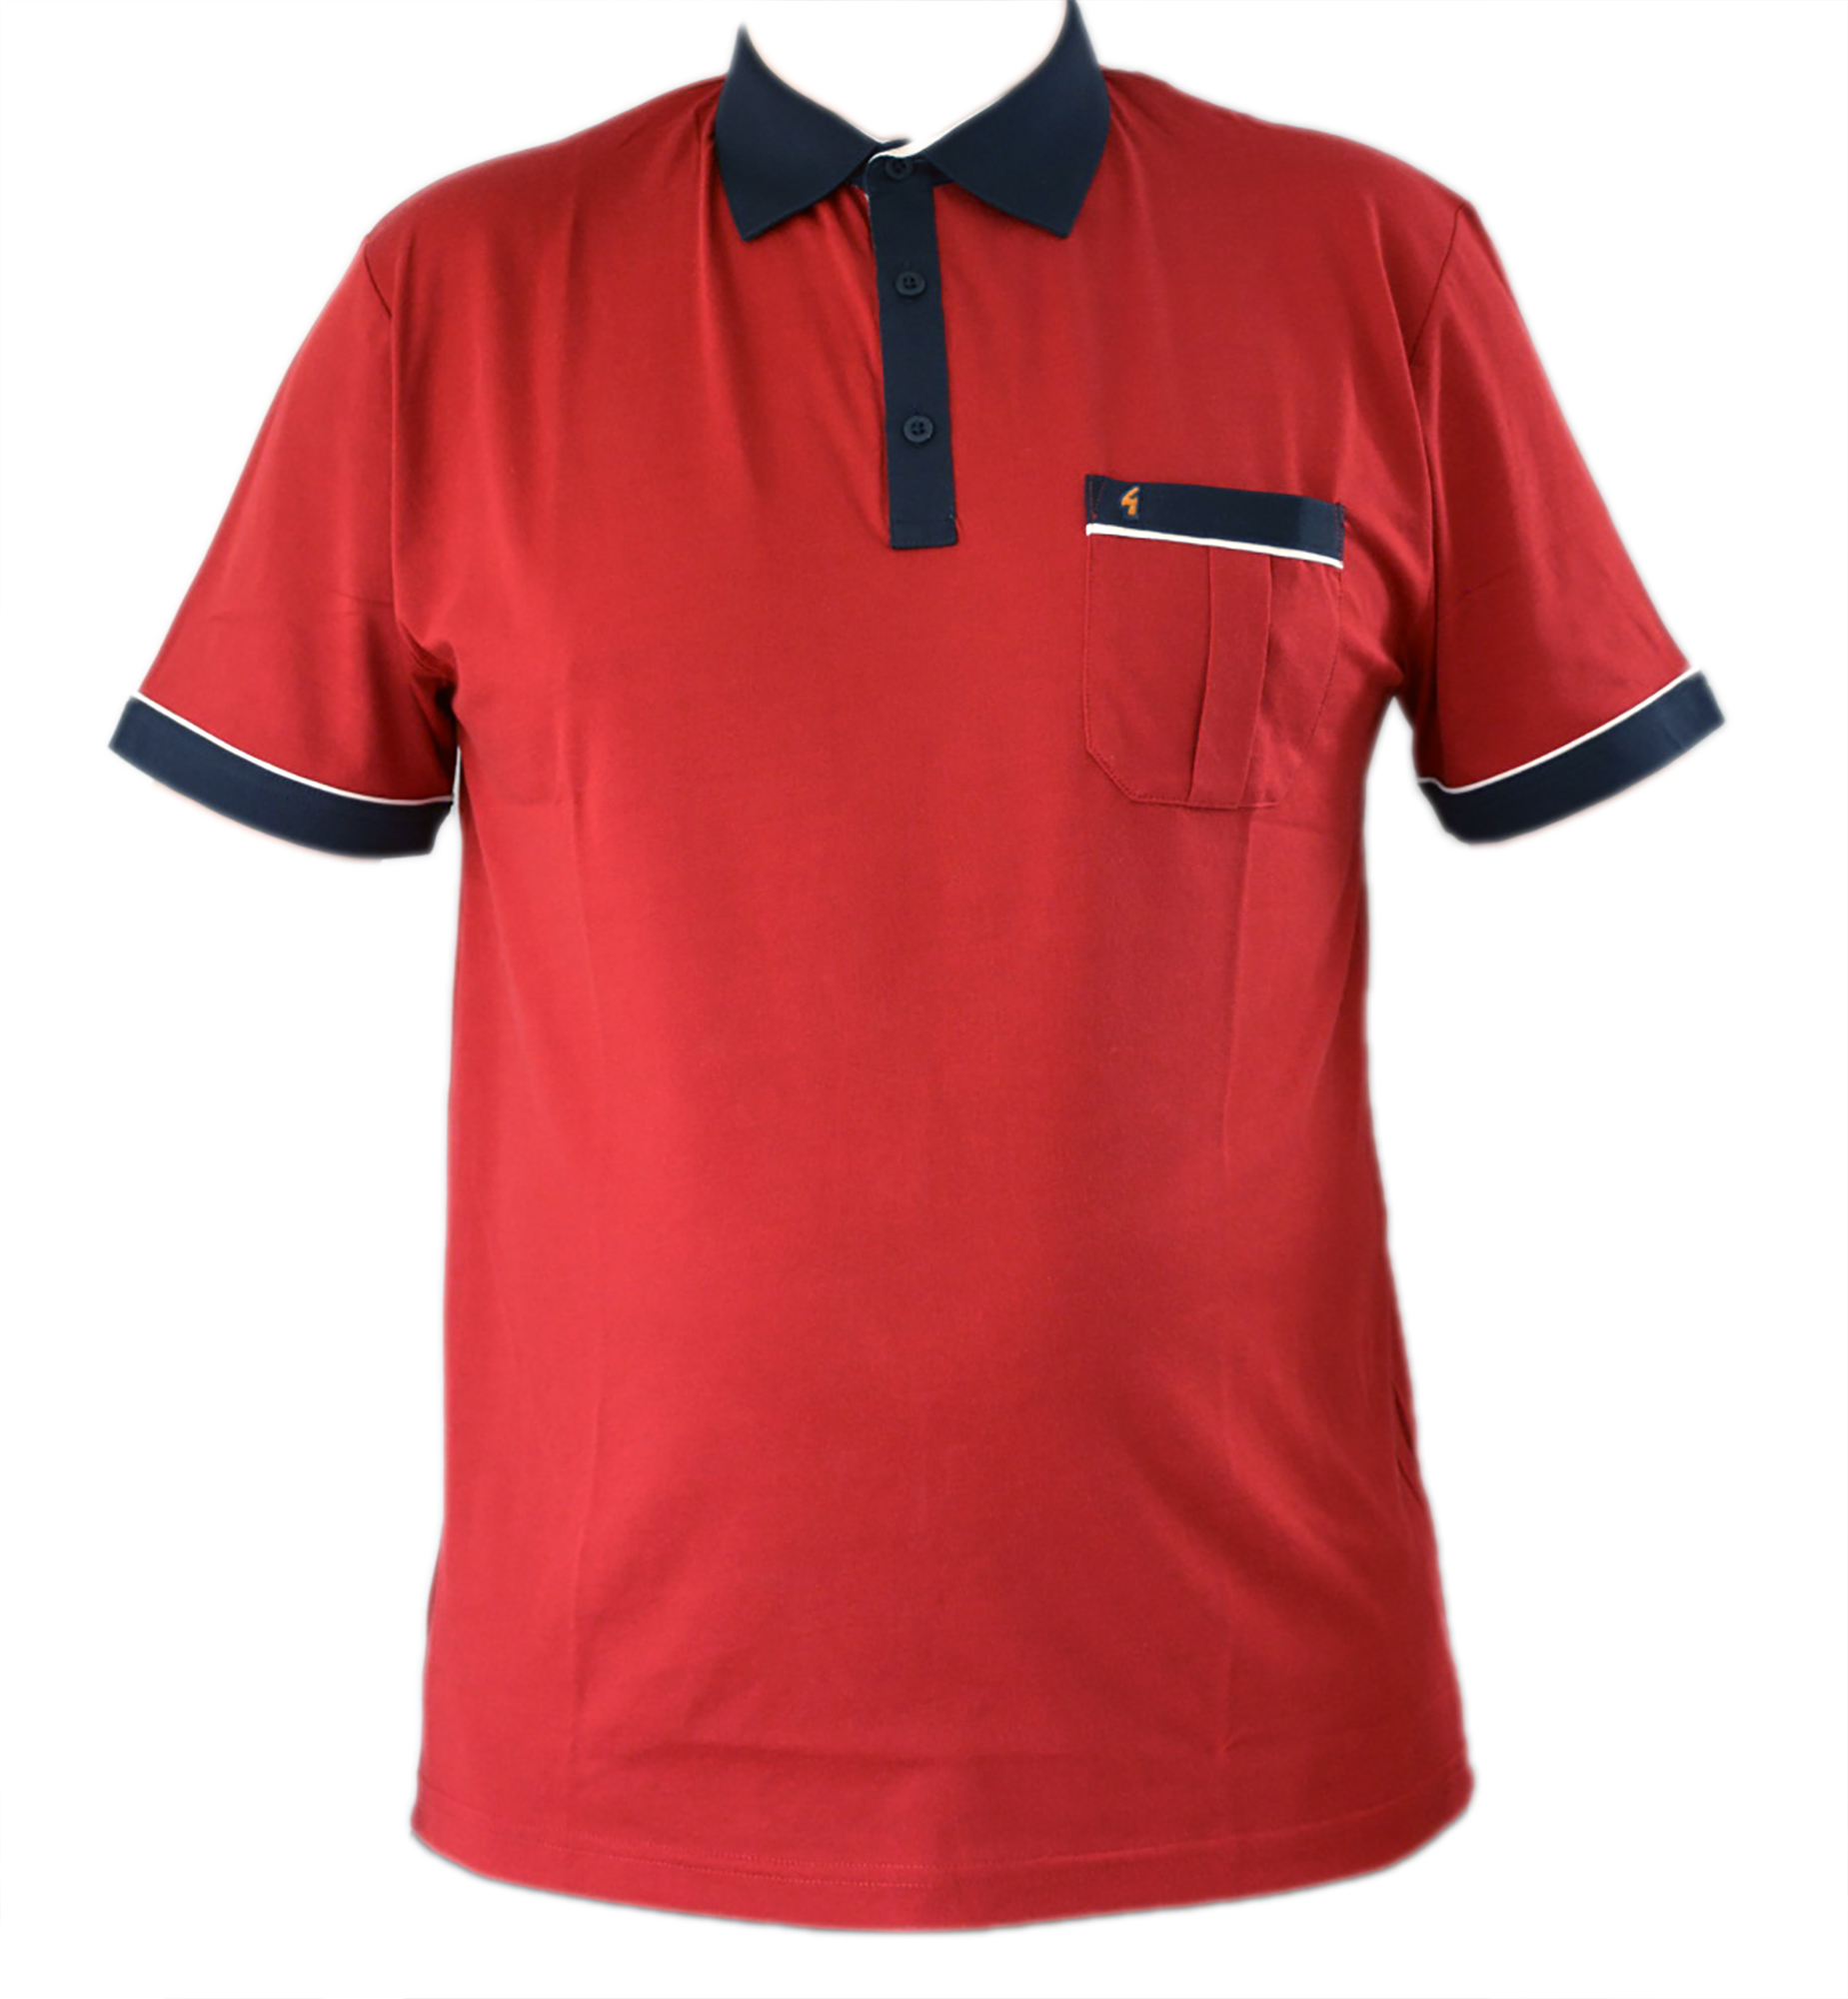 Gabicci - Plain polo shirt with contrast collar sleeve ends collar and breast pocket top